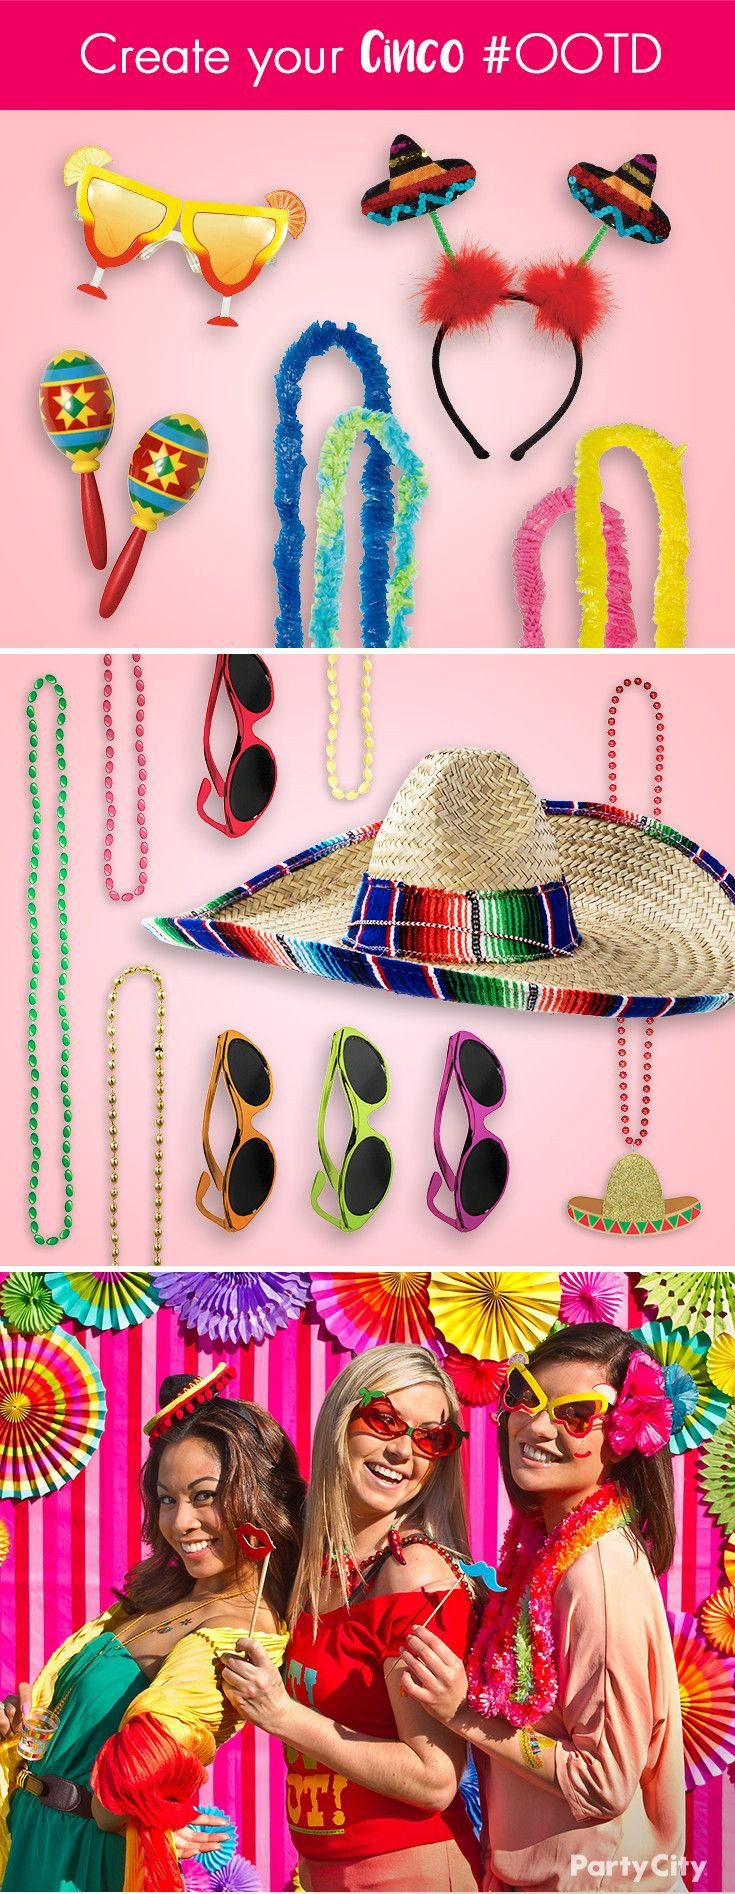 Party City Cinco De Mayo Costumes
 70 best images about Fiesta & Cinco de Mayo Party Ideas on